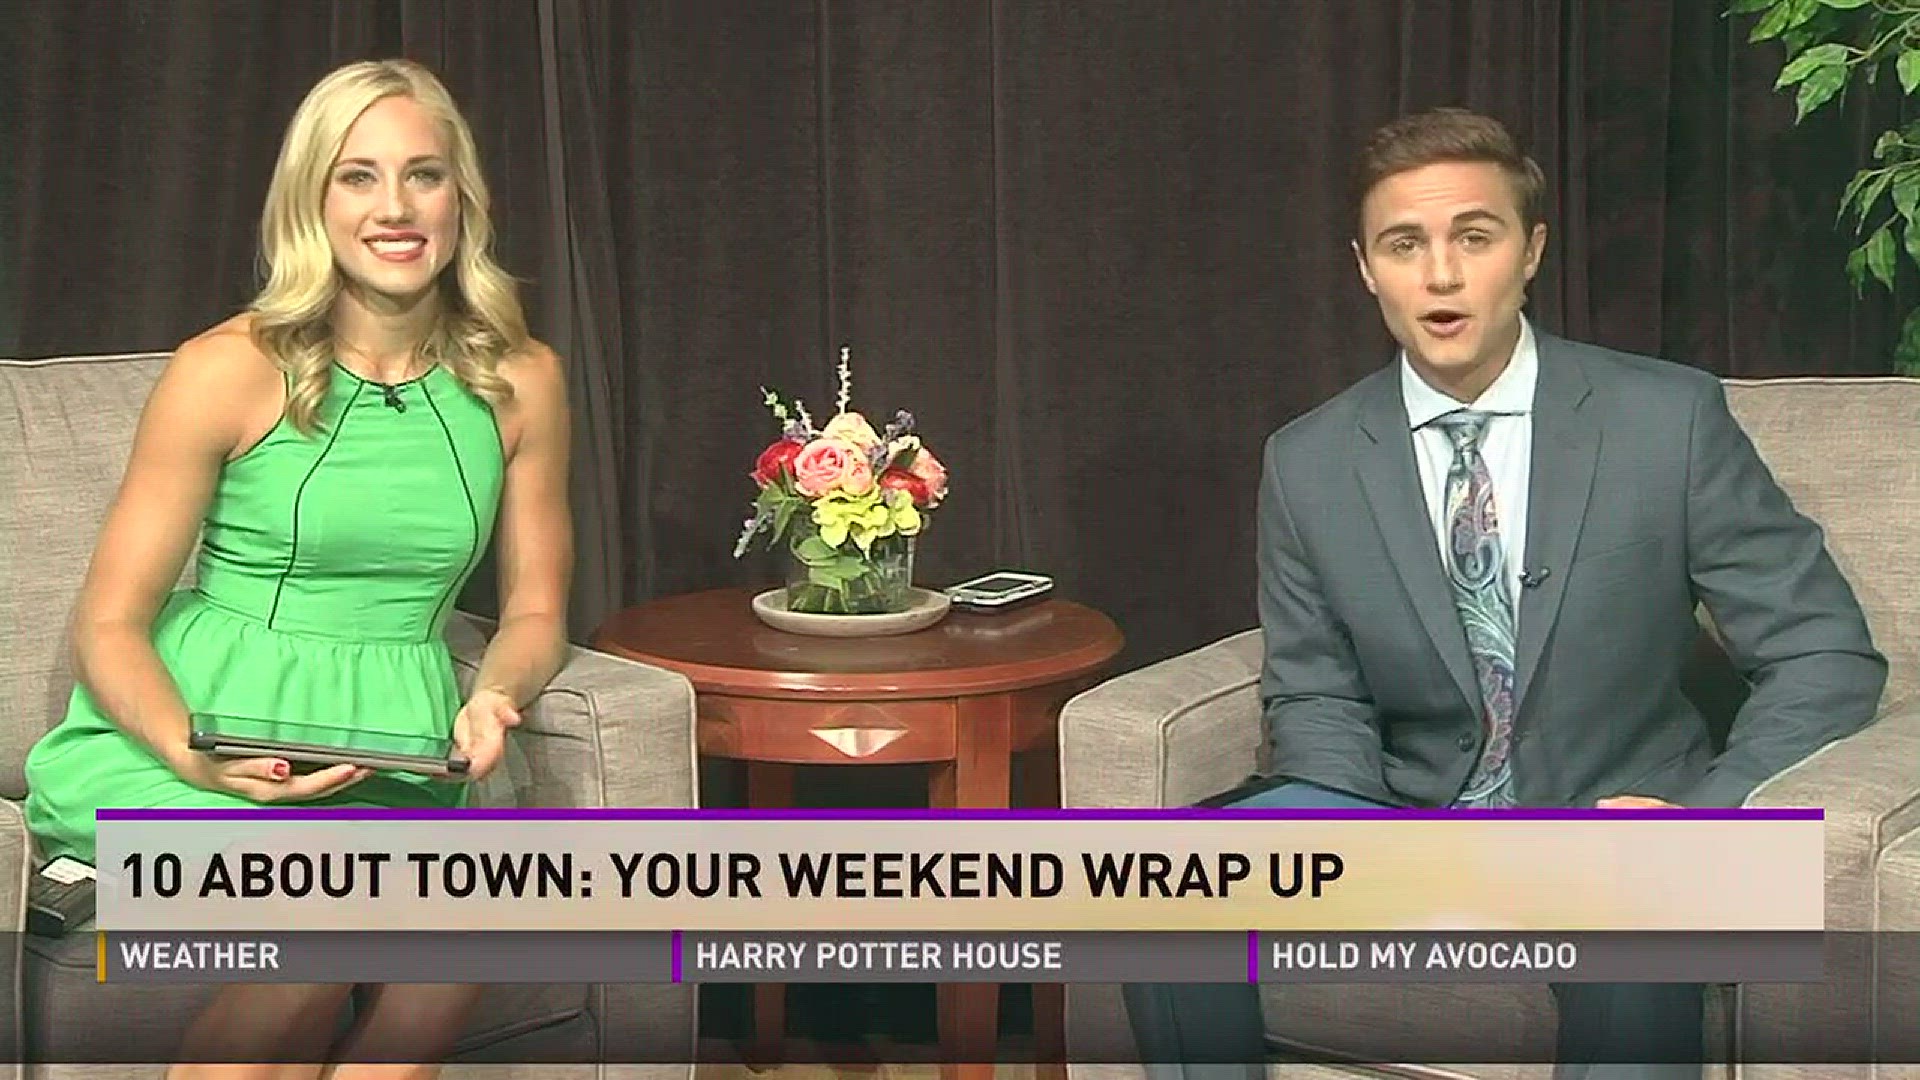 Leslie, Daniel and Rebecca cover all the fun events around town this weekend.